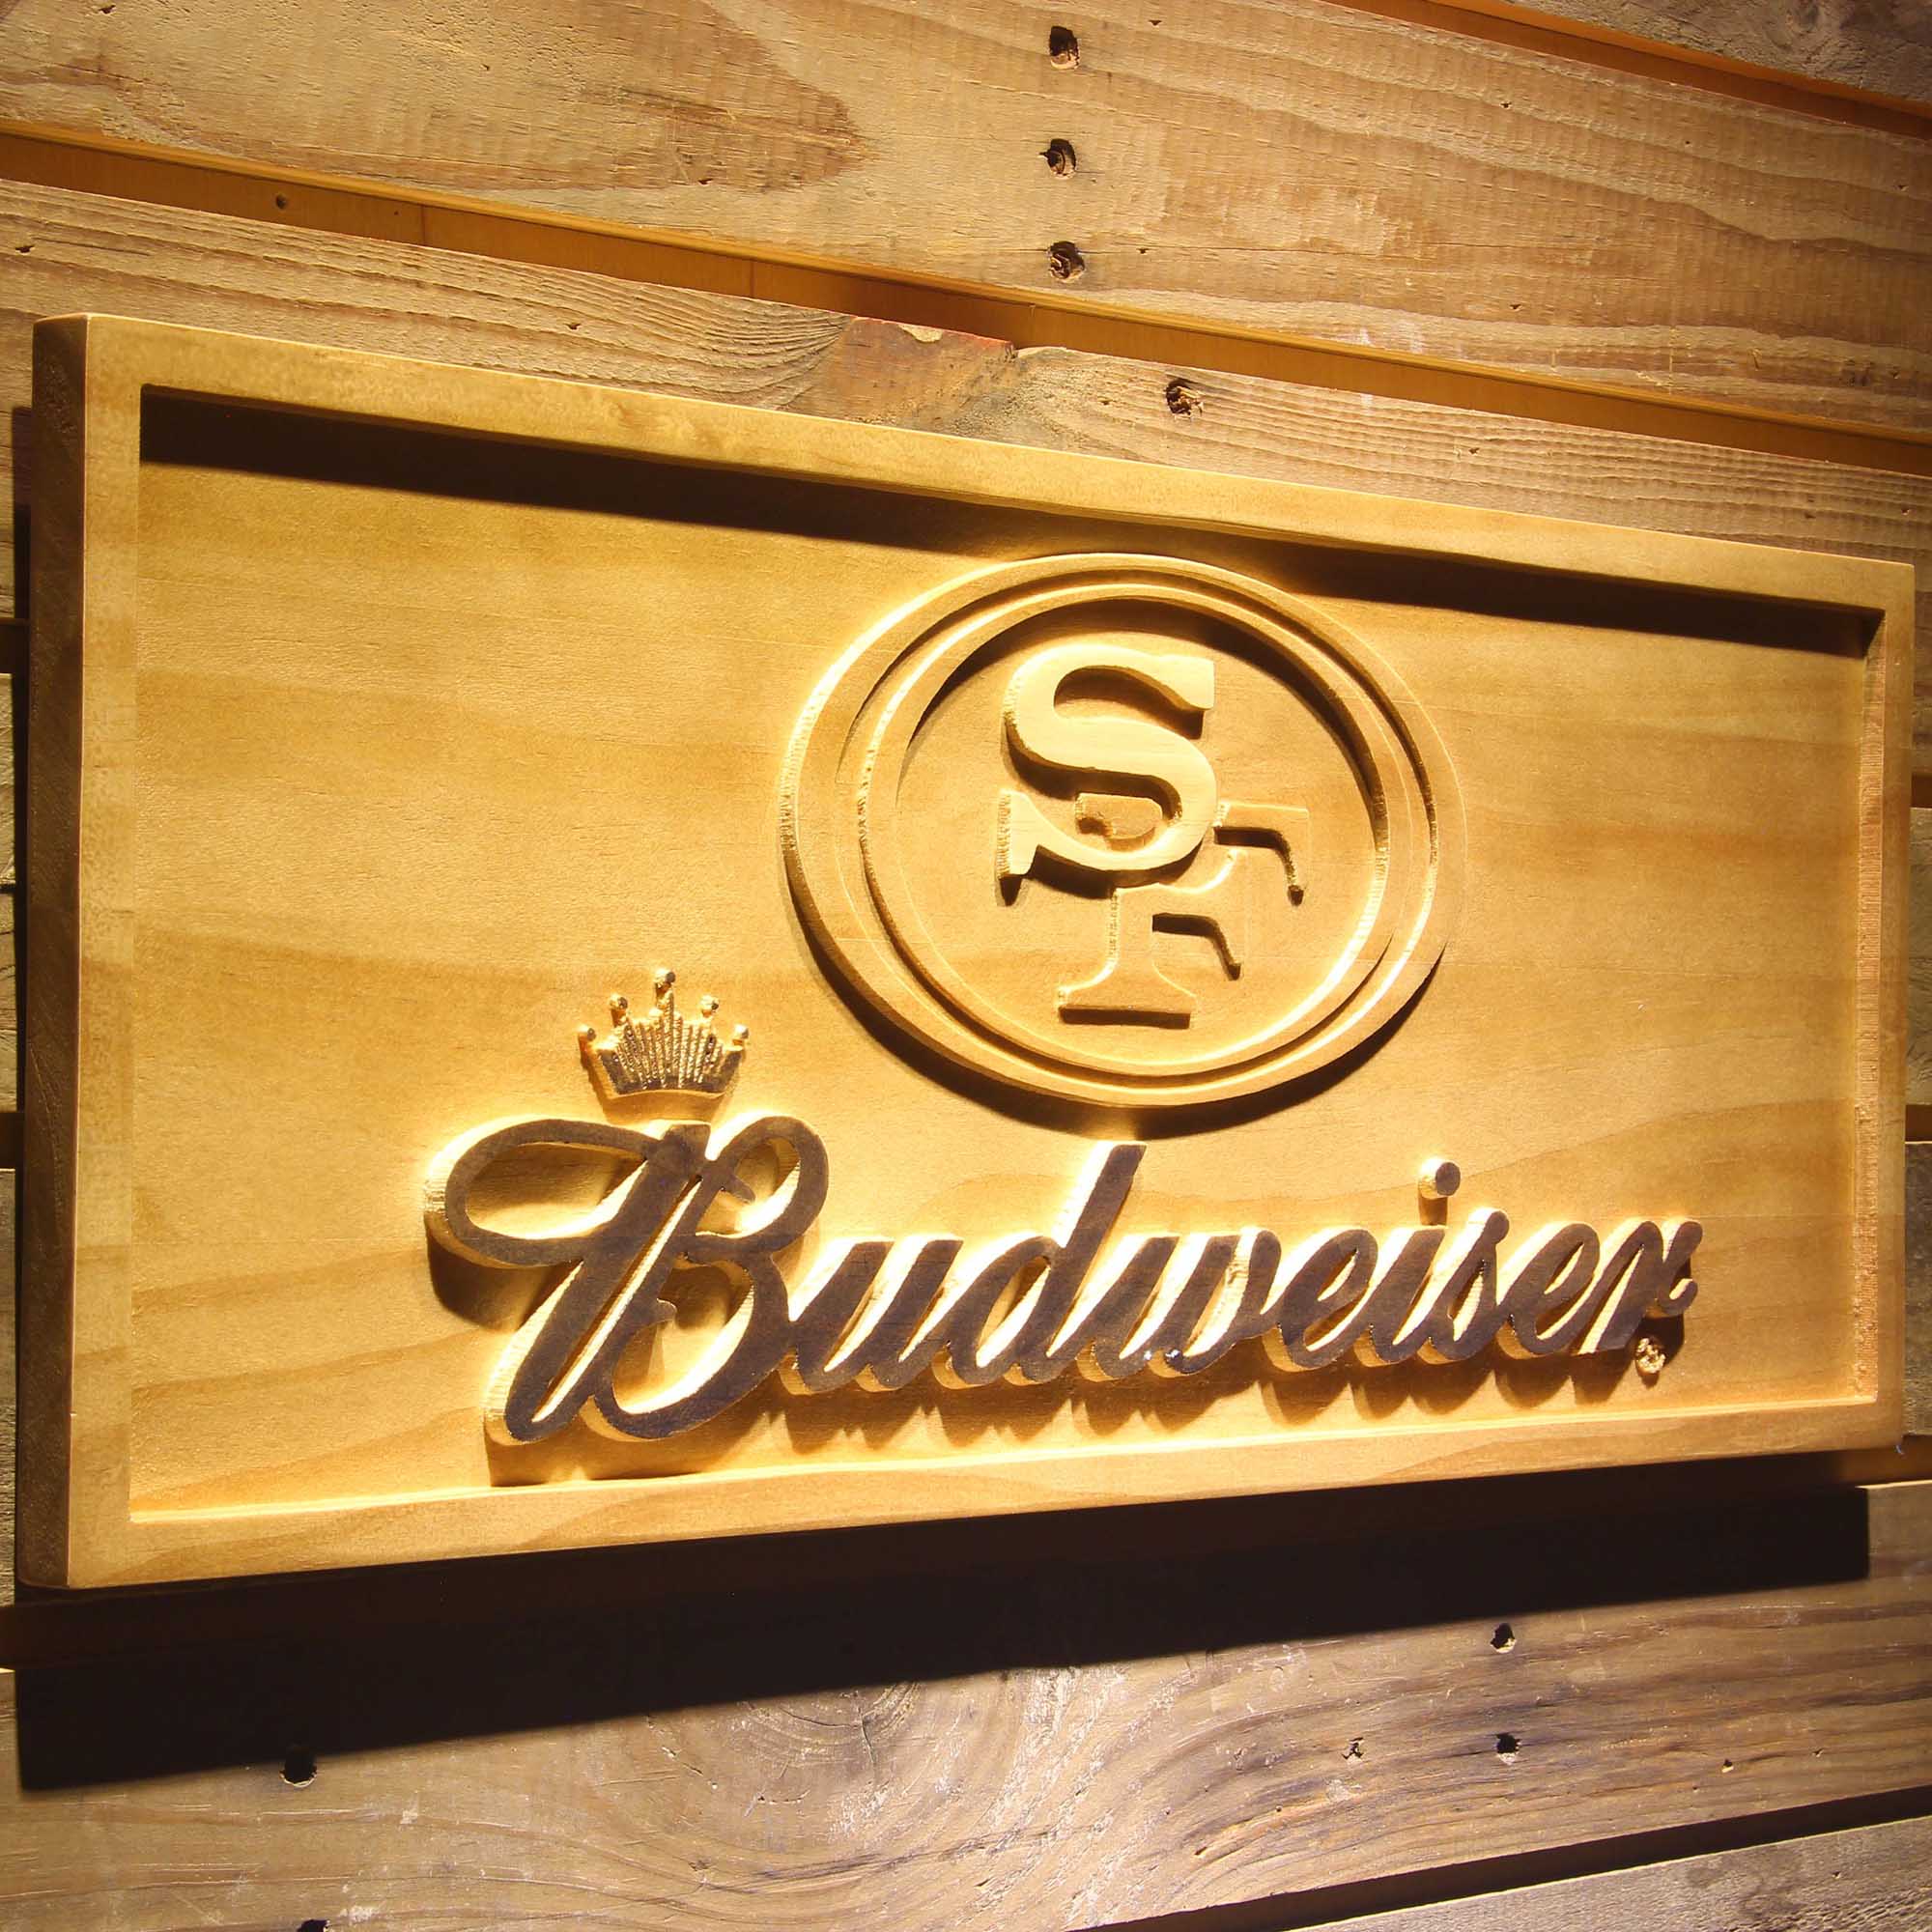 San Francisco 49ers Budweiser 3D Solid Wooden Craving Sign